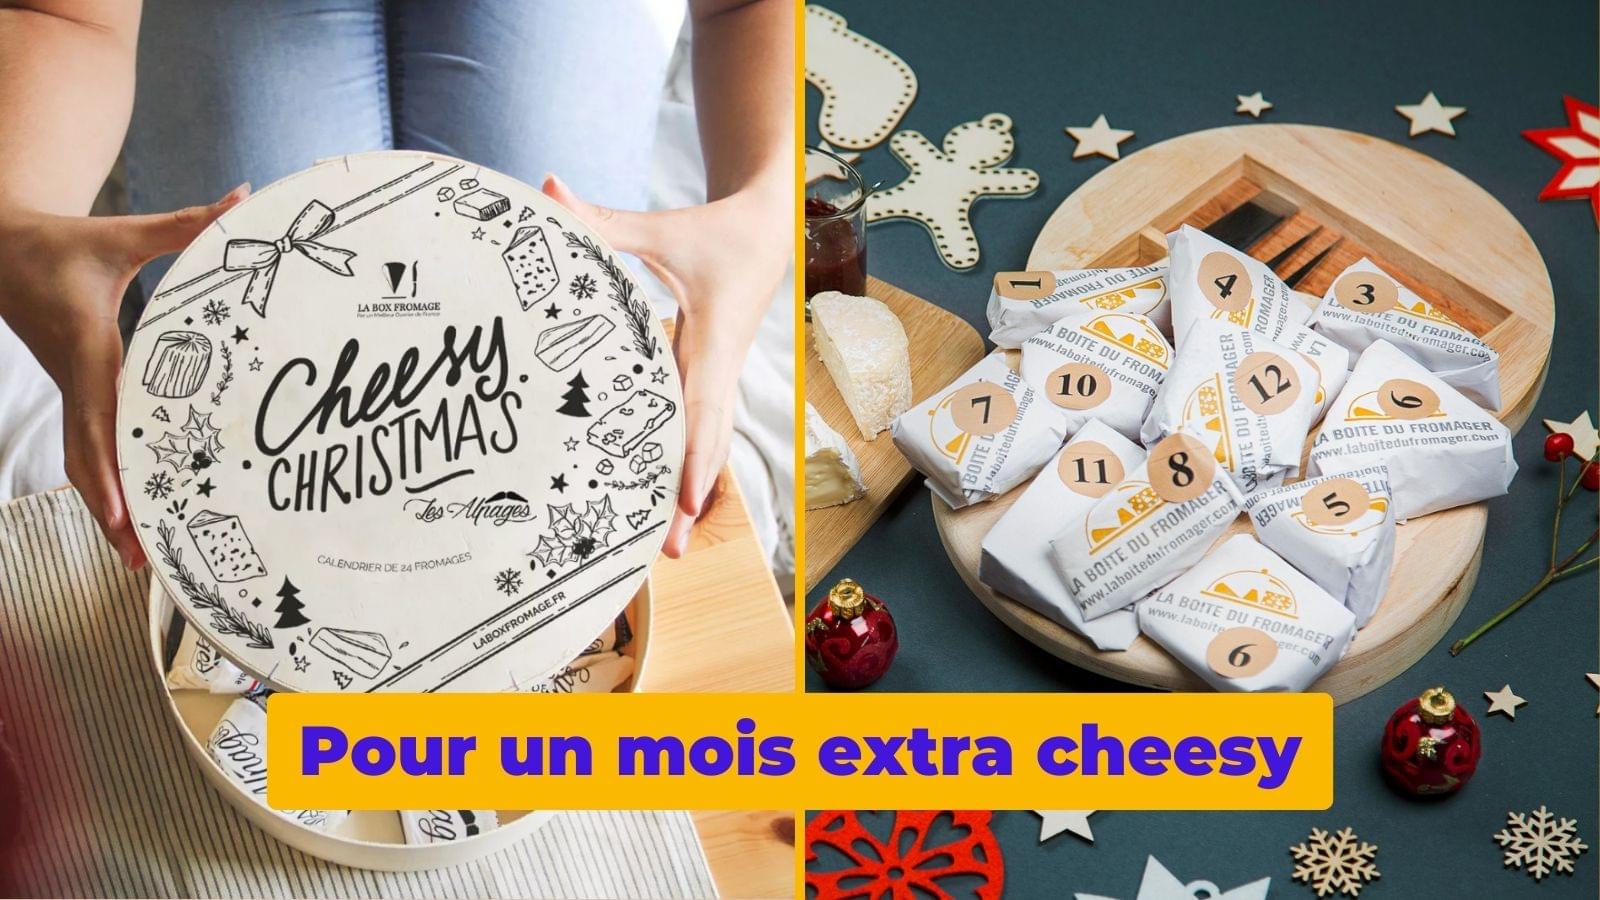 Calendrier de l'Avent Fromage Chat-Bo